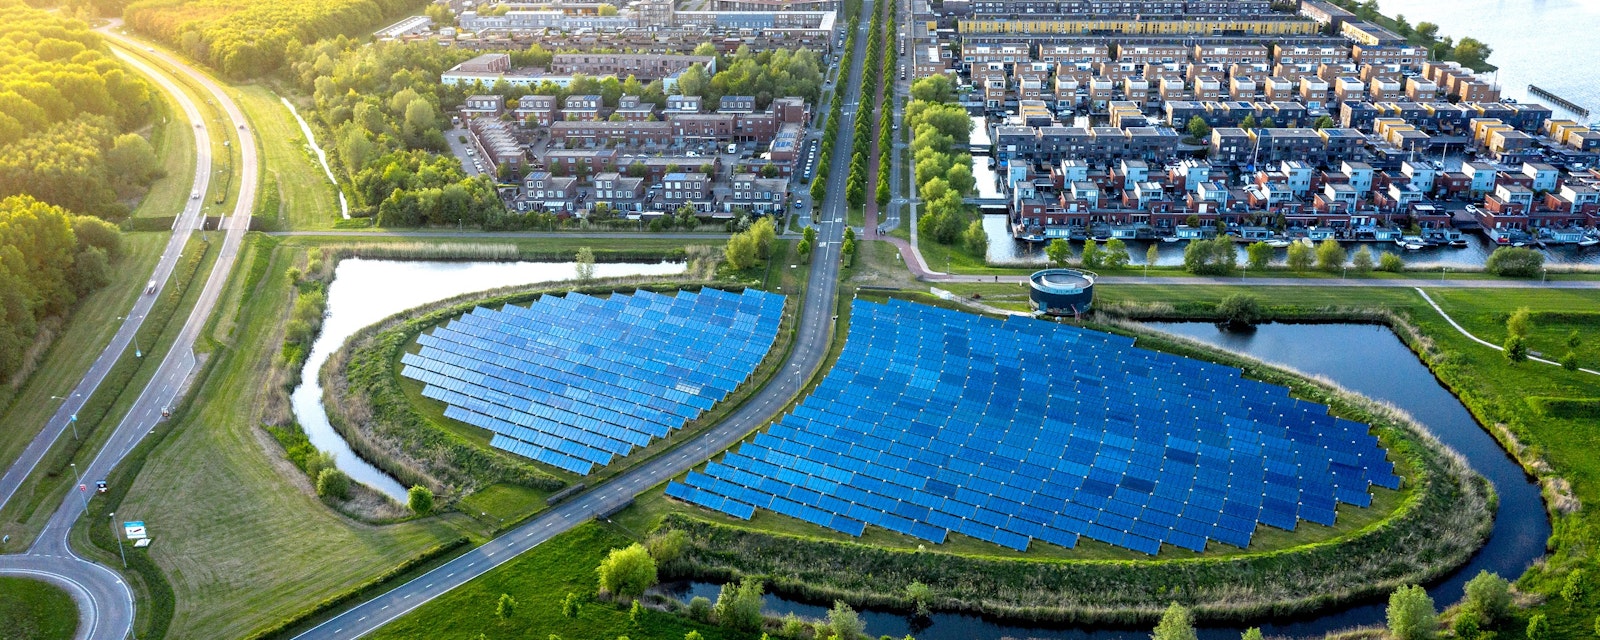 Modern,Sustainable,Neighbourhood,In,Almere,,The,Netherlands.,The,City,Heating